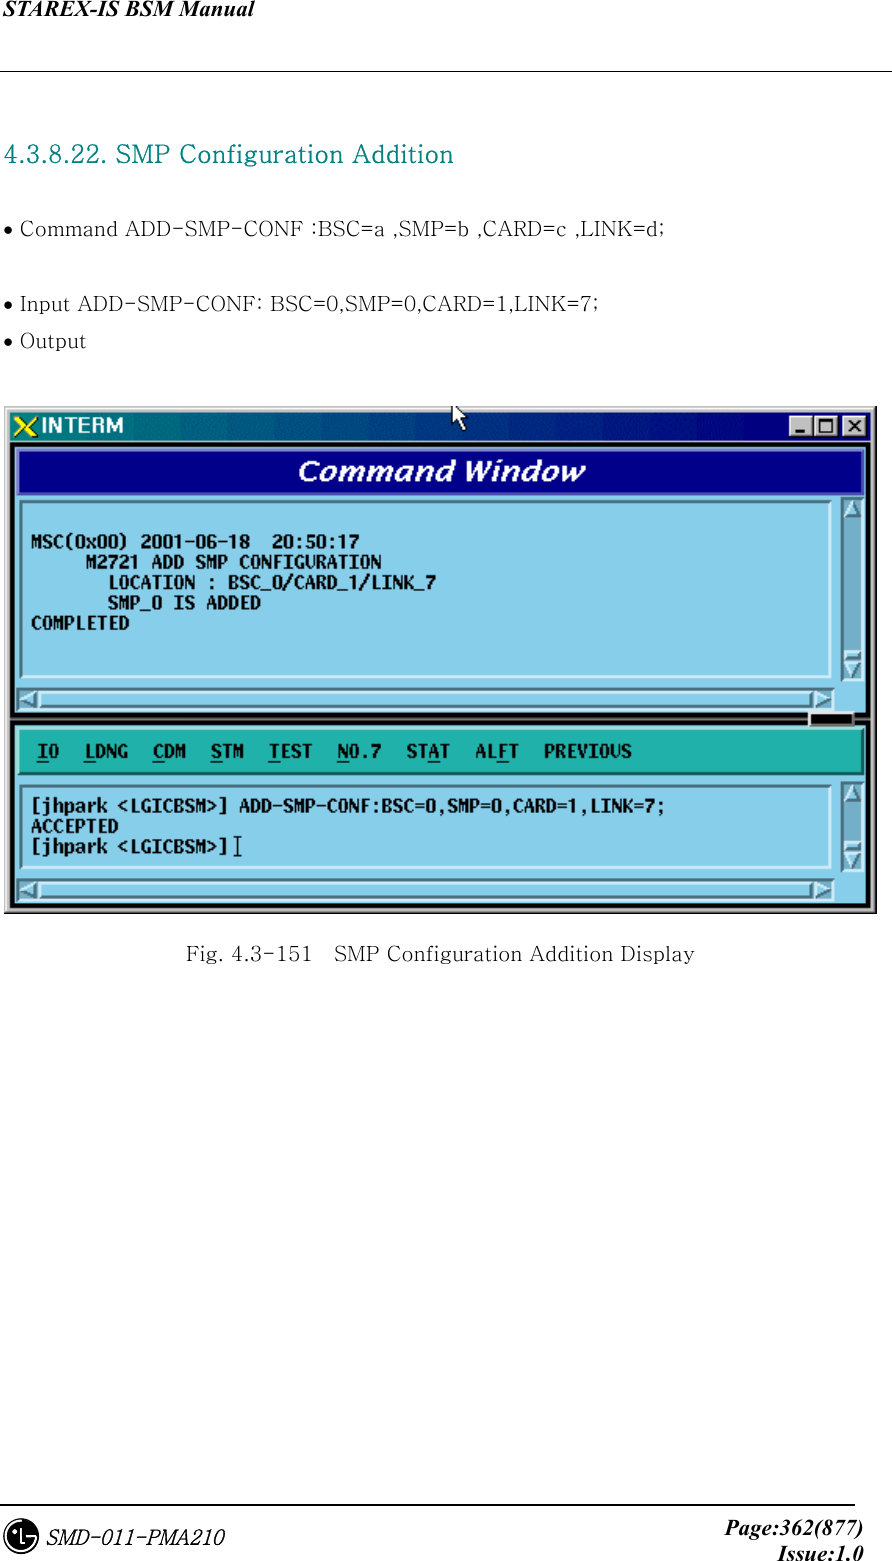 STAREX-IS BSM Manual     Page:362(877)Issue:1.0SMD-011-PMA210  4.3.8.22. SMP Configuration Addition   • Command ADD-SMP-CONF :BSC=a ,SMP=b ,CARD=c ,LINK=d;  • Input ADD-SMP-CONF: BSC=0,SMP=0,CARD=1,LINK=7; • Output   Fig. 4.3-151    SMP Configuration Addition Display 